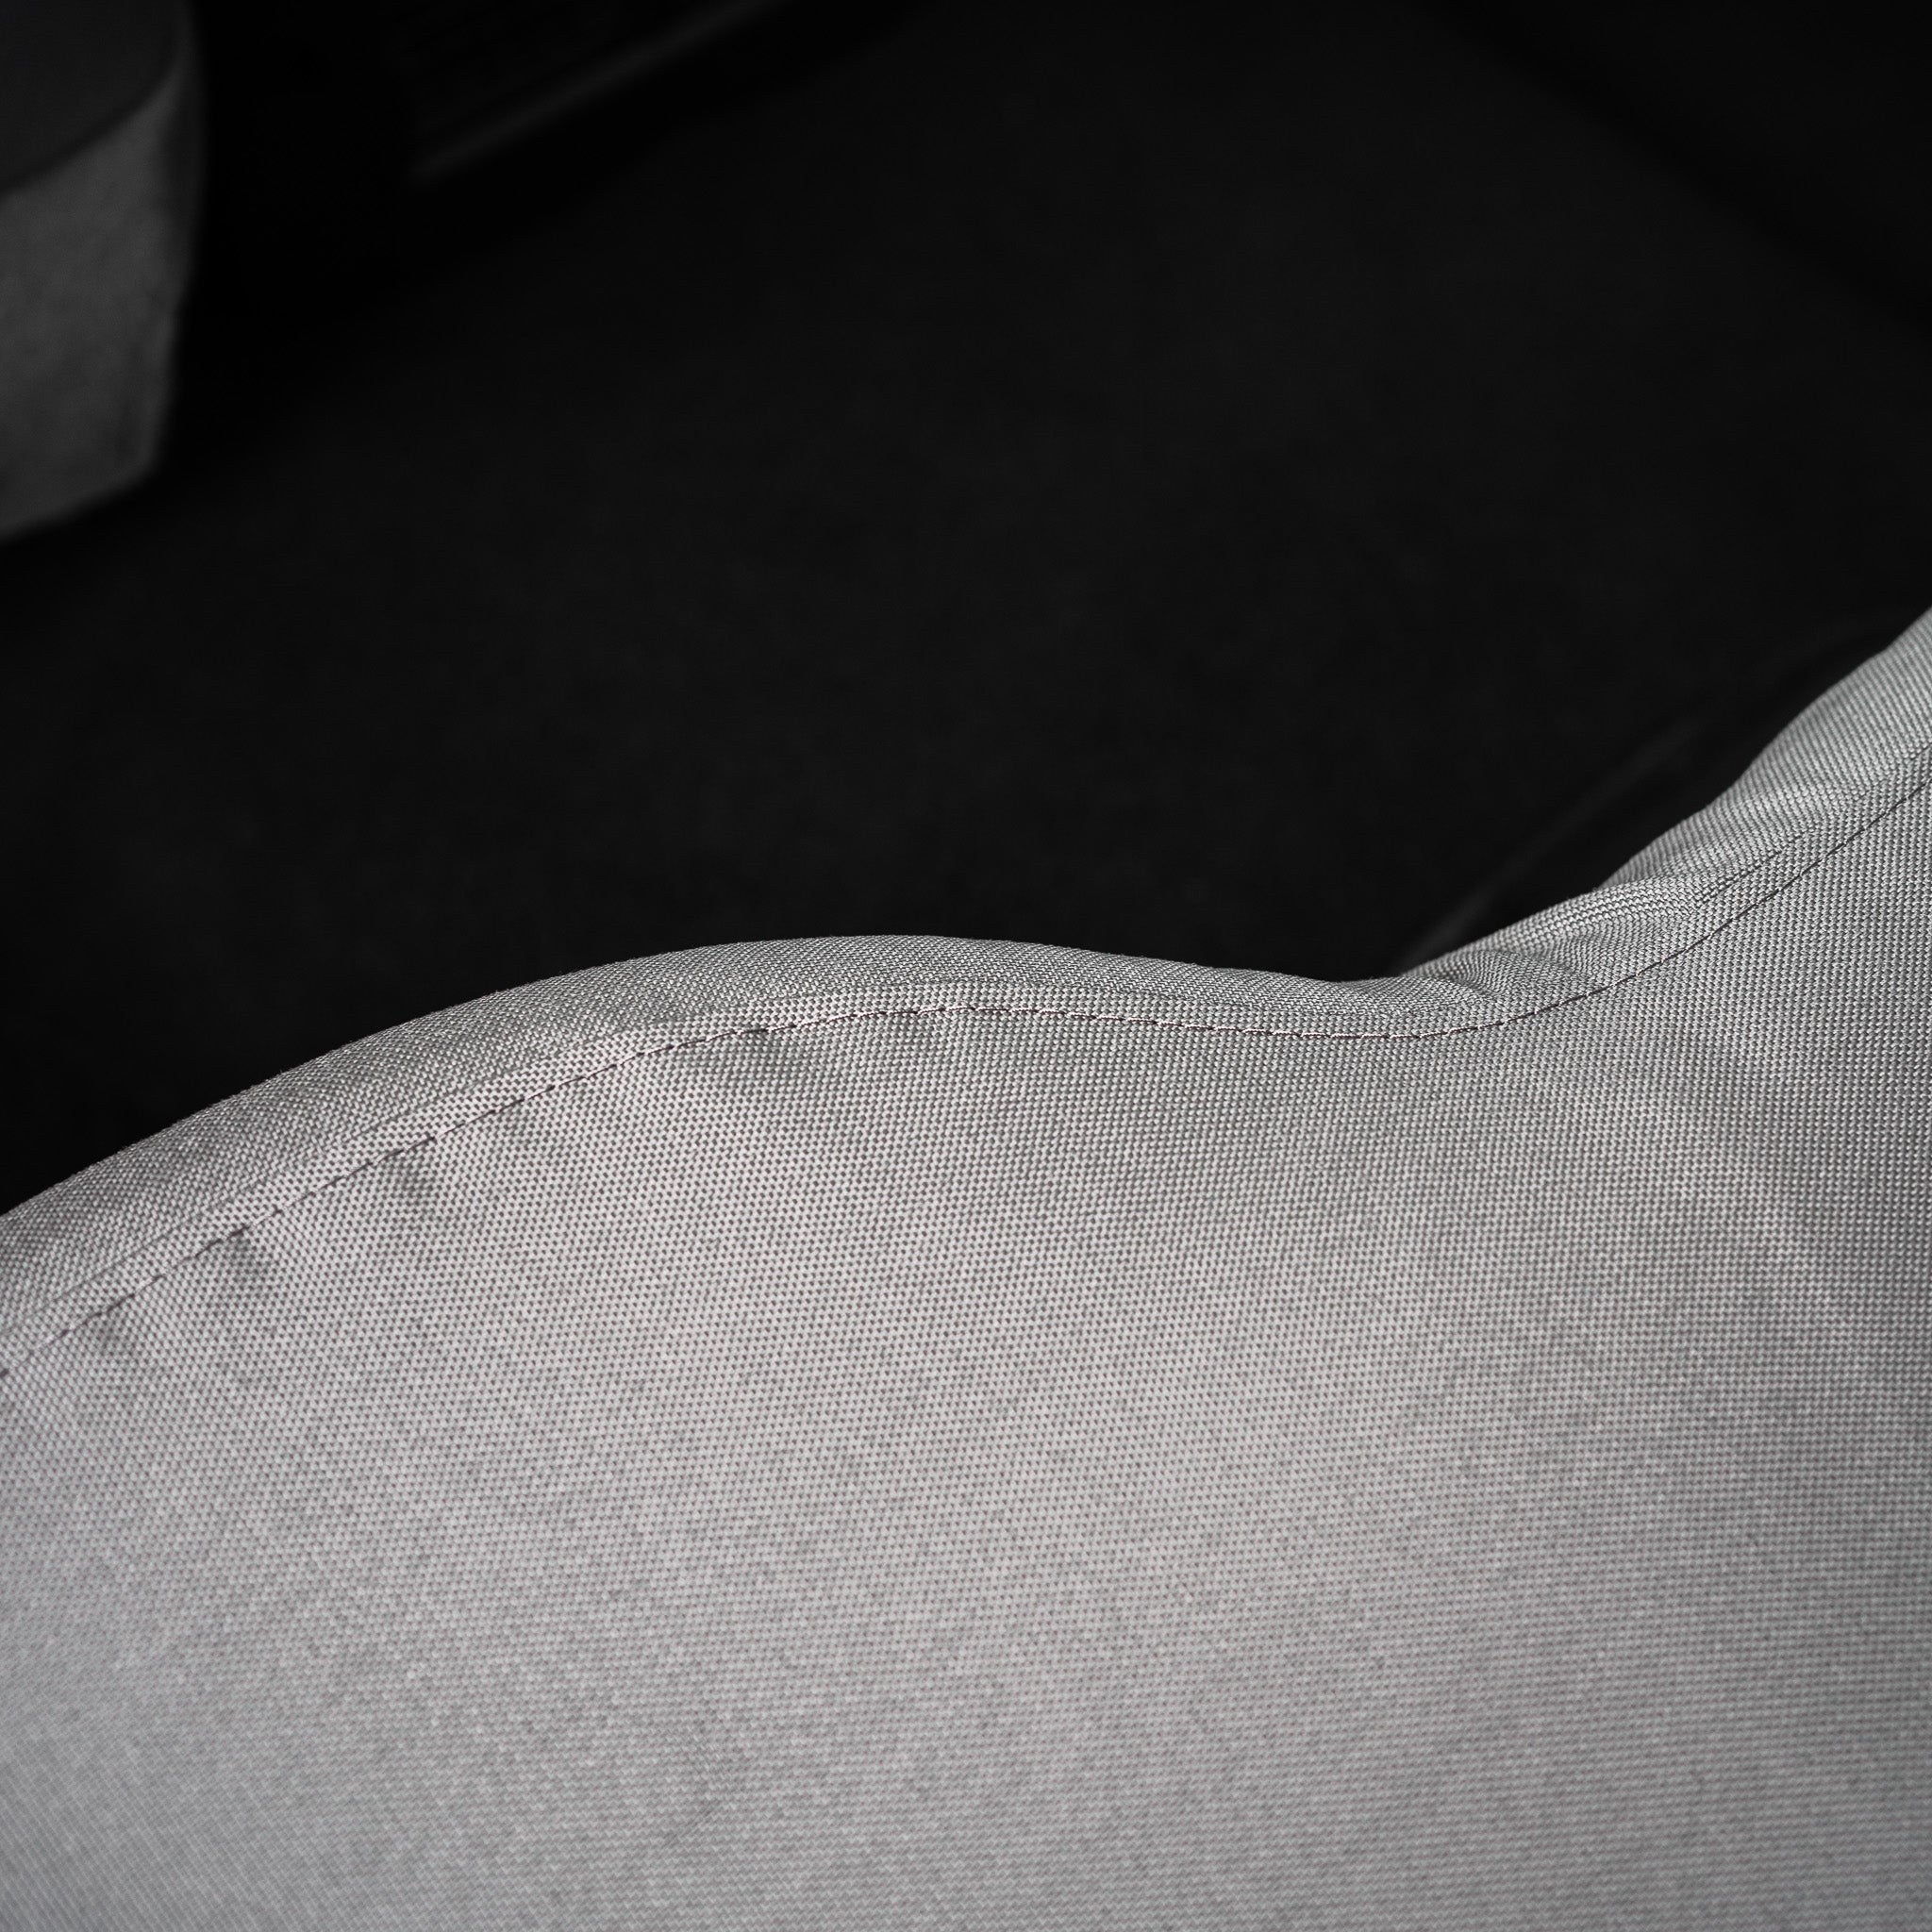 Detail photo showing a seam on this TigerTough cover for a RAM full bench seat. Every single stitch happens right here in America.